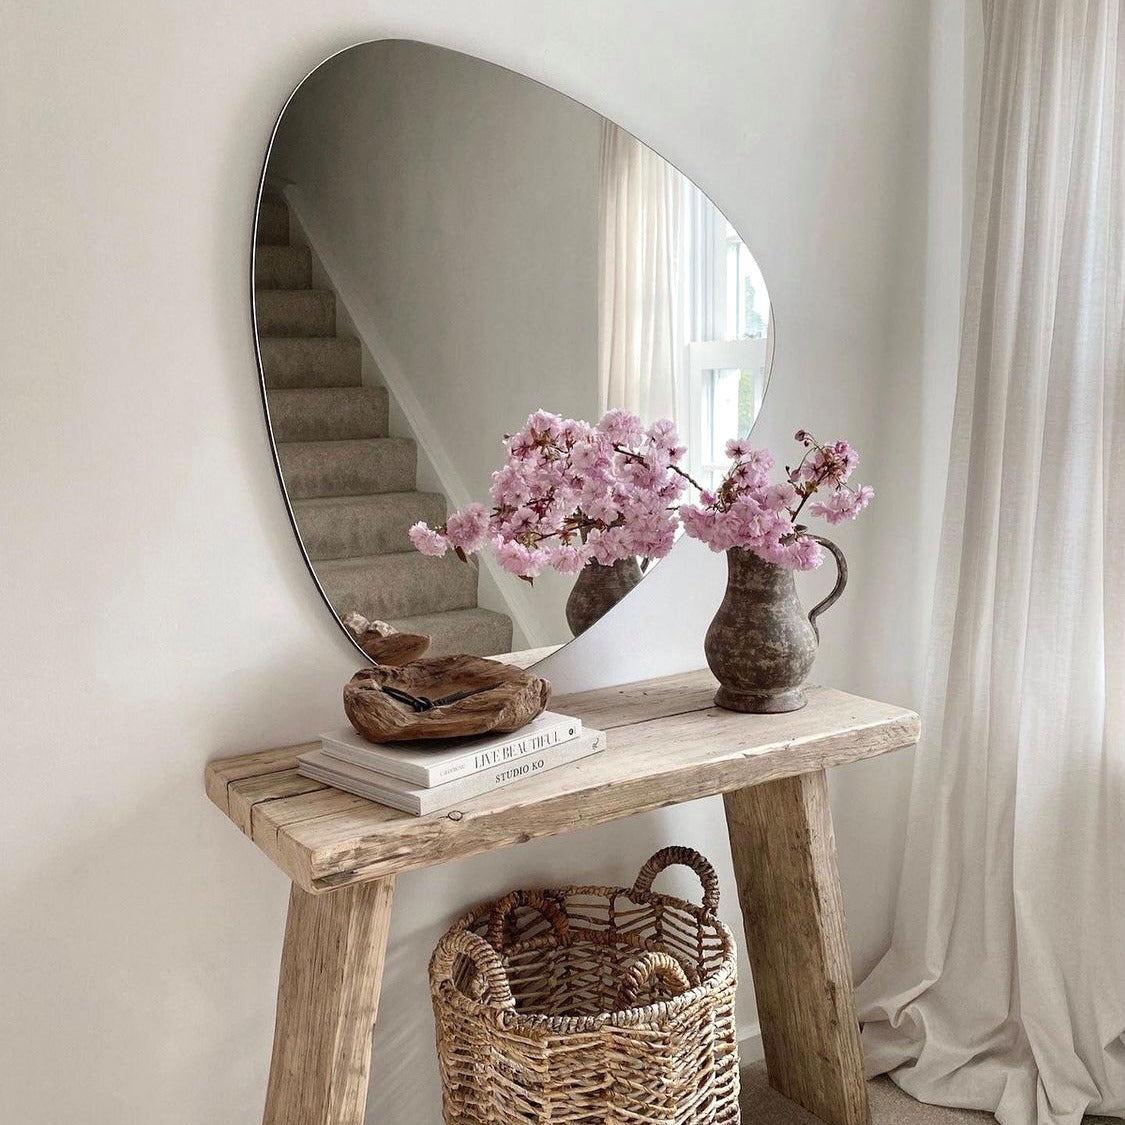 Large Frameless Pebble Wall Mirror above console table